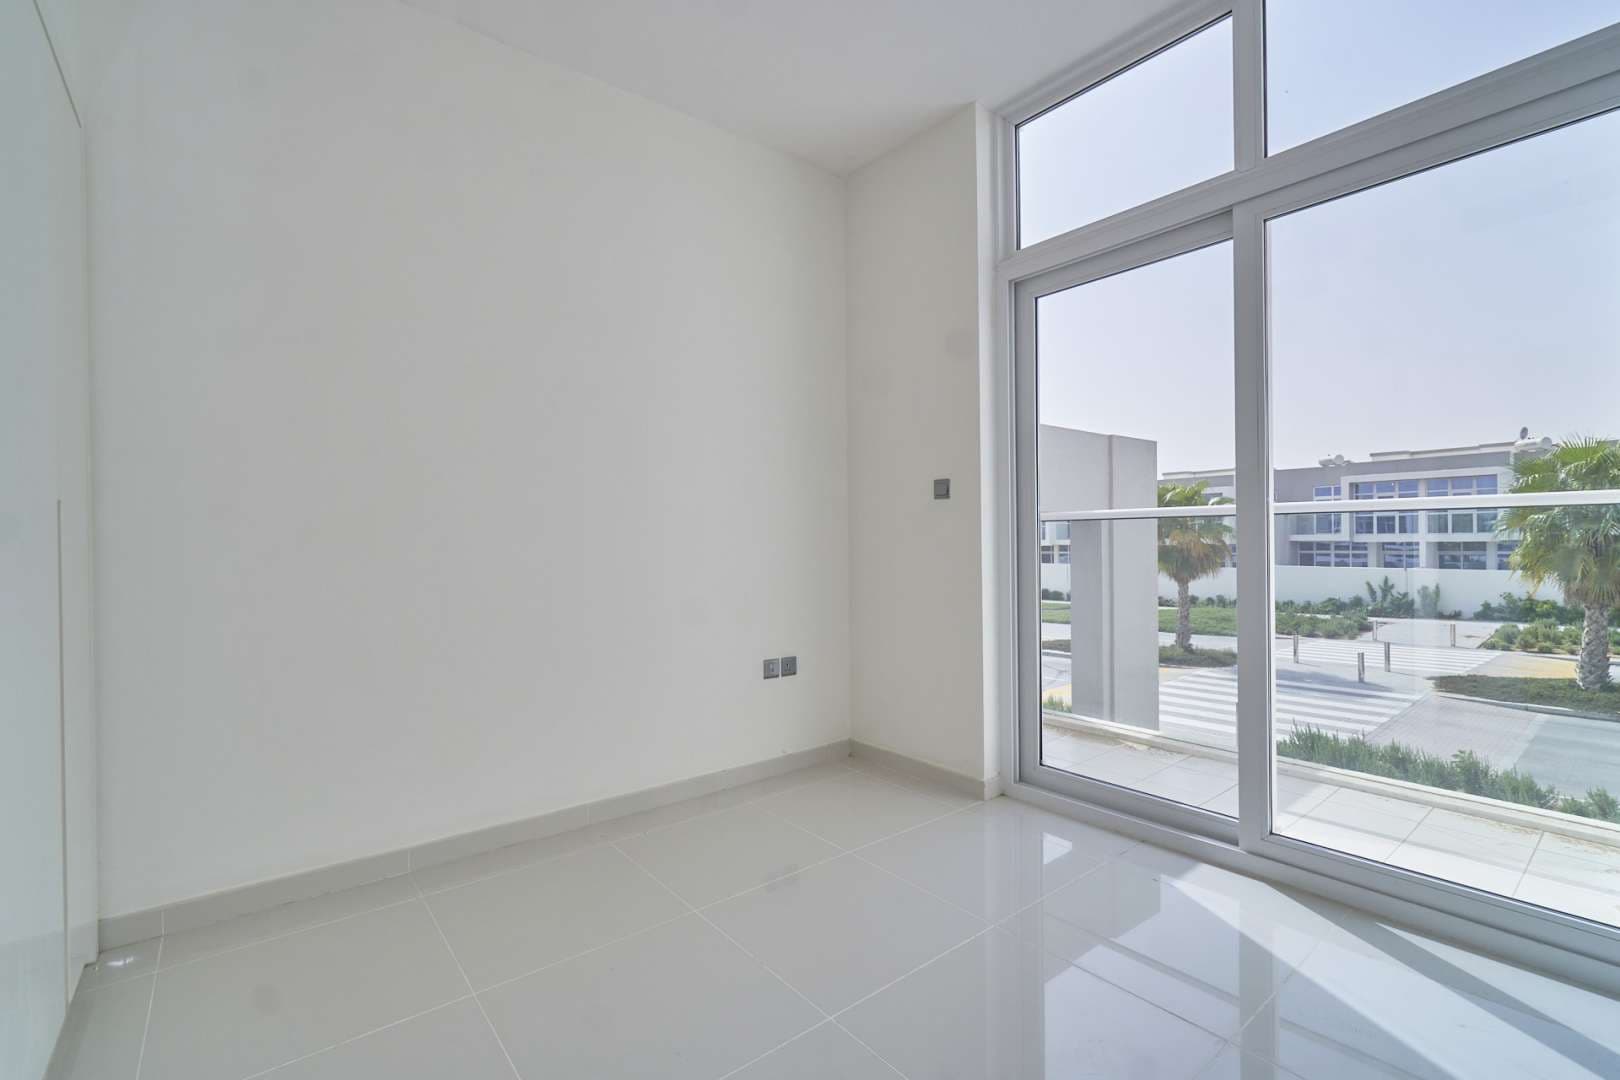 3 Bedroom Townhouse For Rent Mimosa Lp07923 1bf8873c3d08f000.jpg